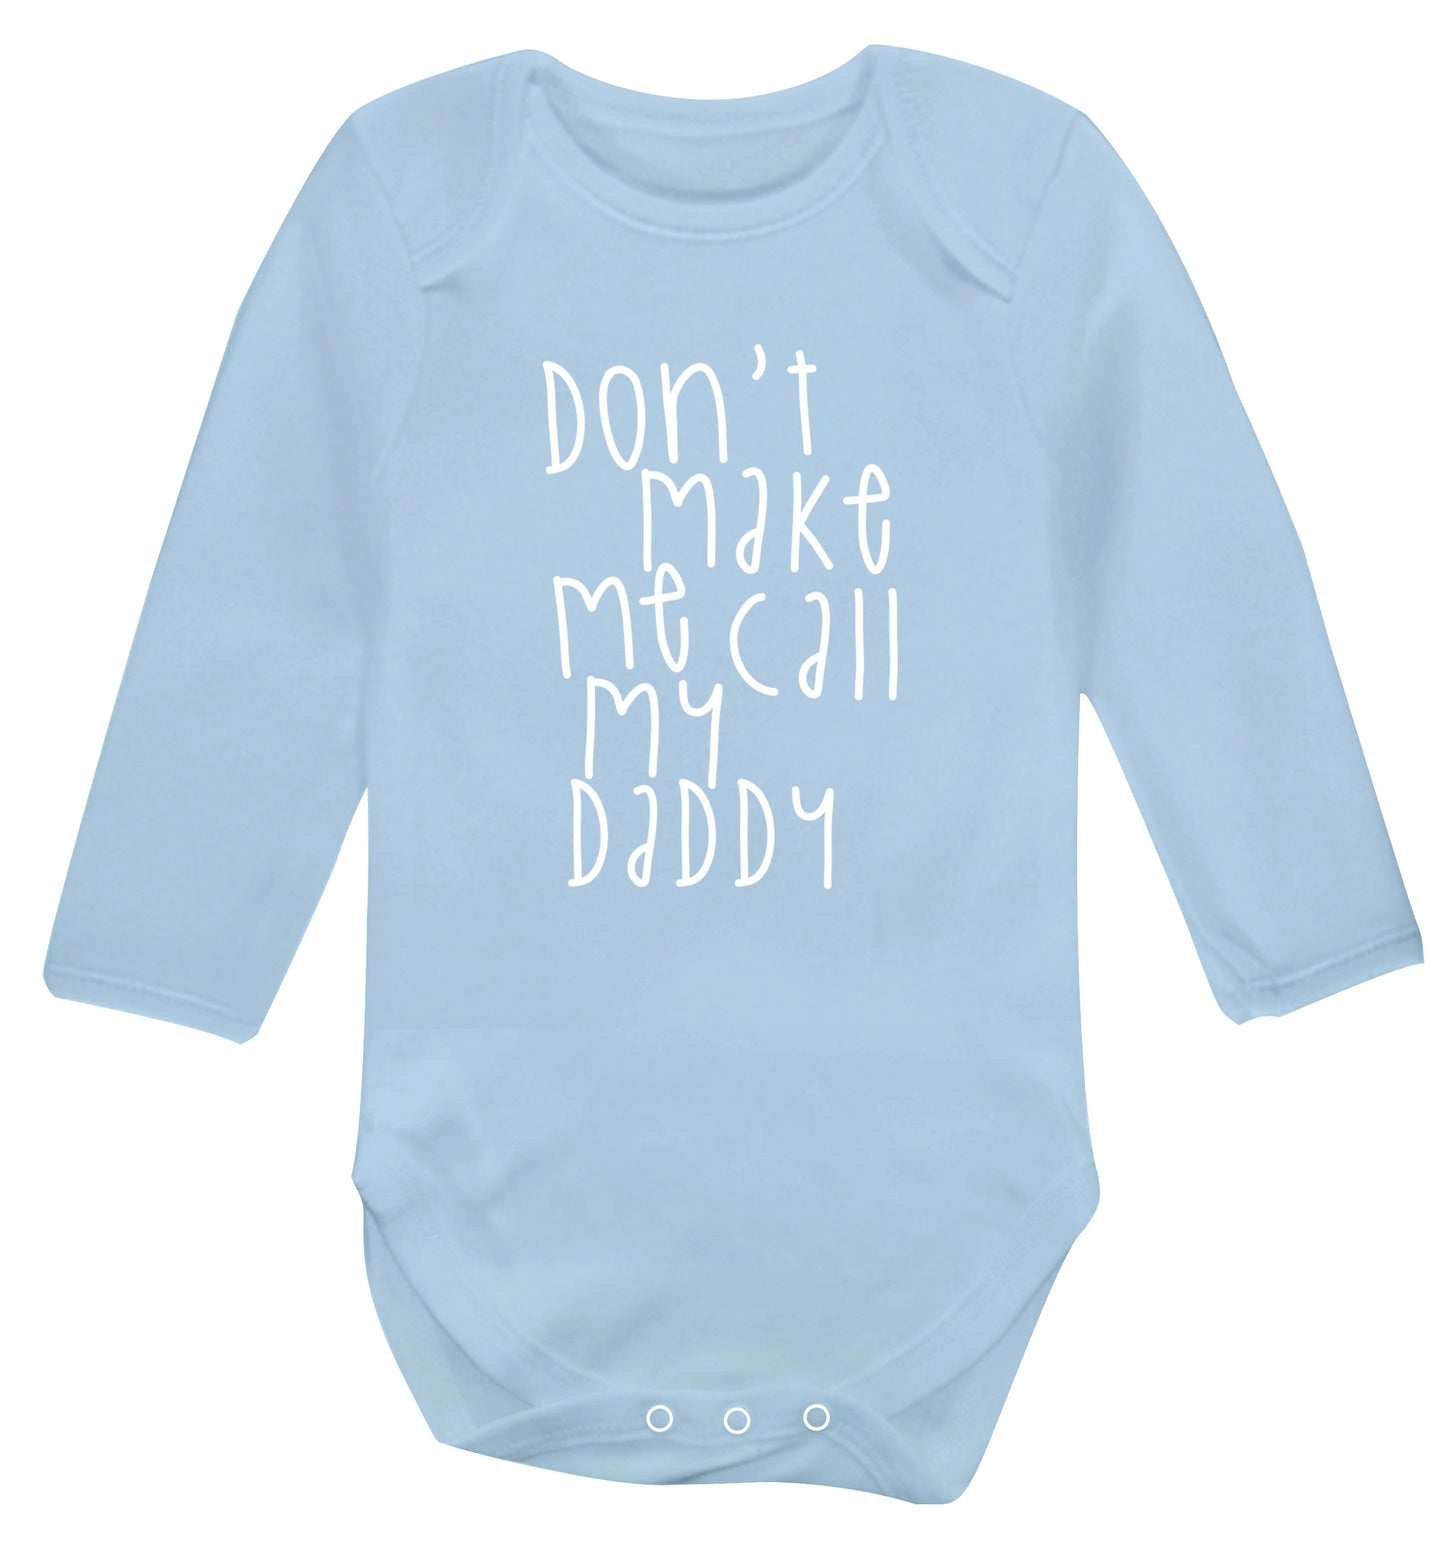 Don't make me call my daddy Baby Vest long sleeved pale blue 6-12 months